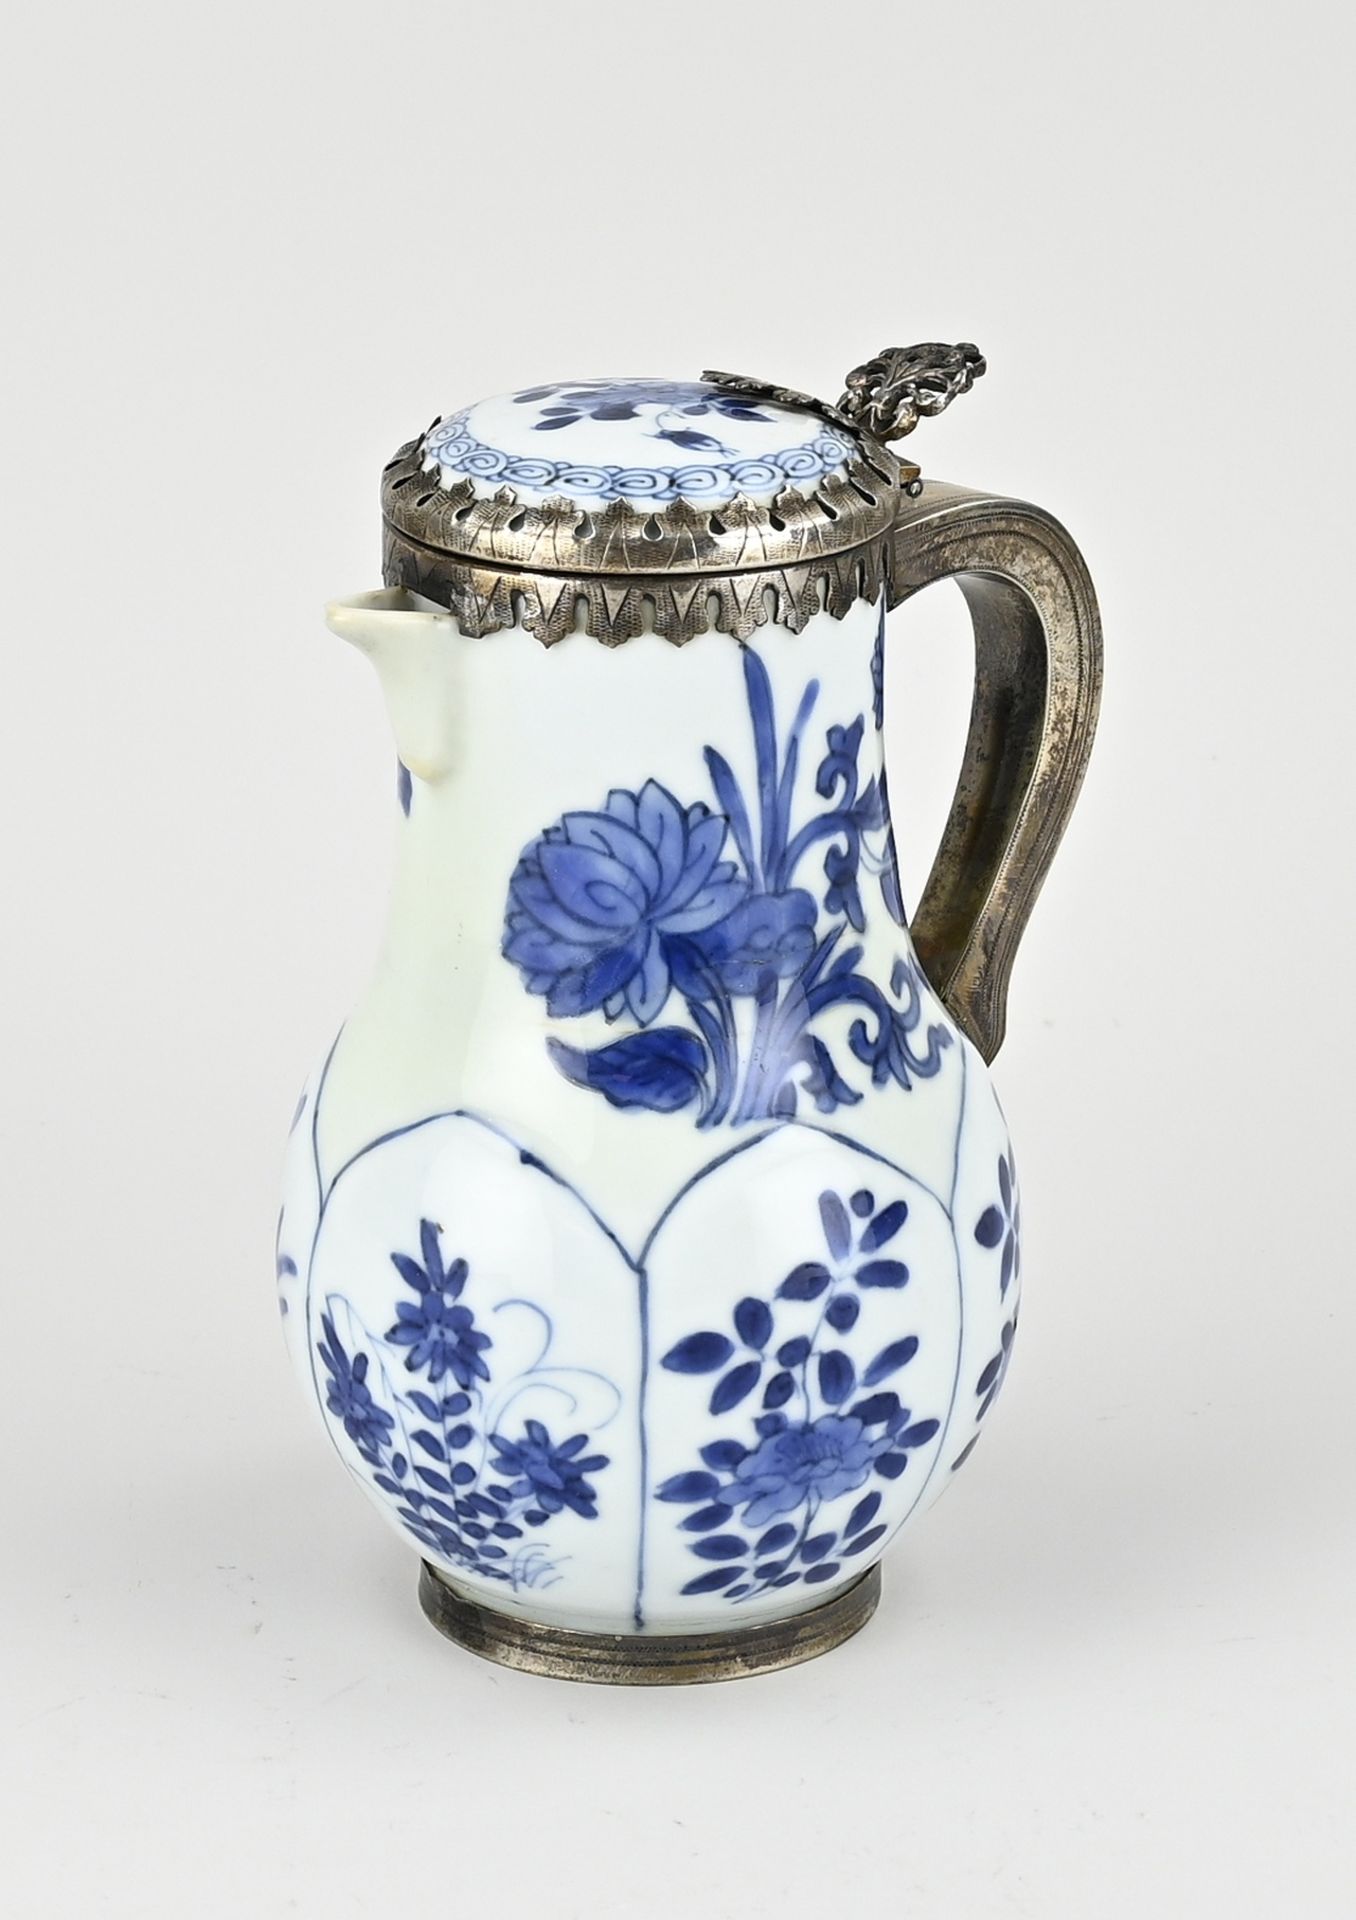 Chinese jug with silverware, H 15 cm.